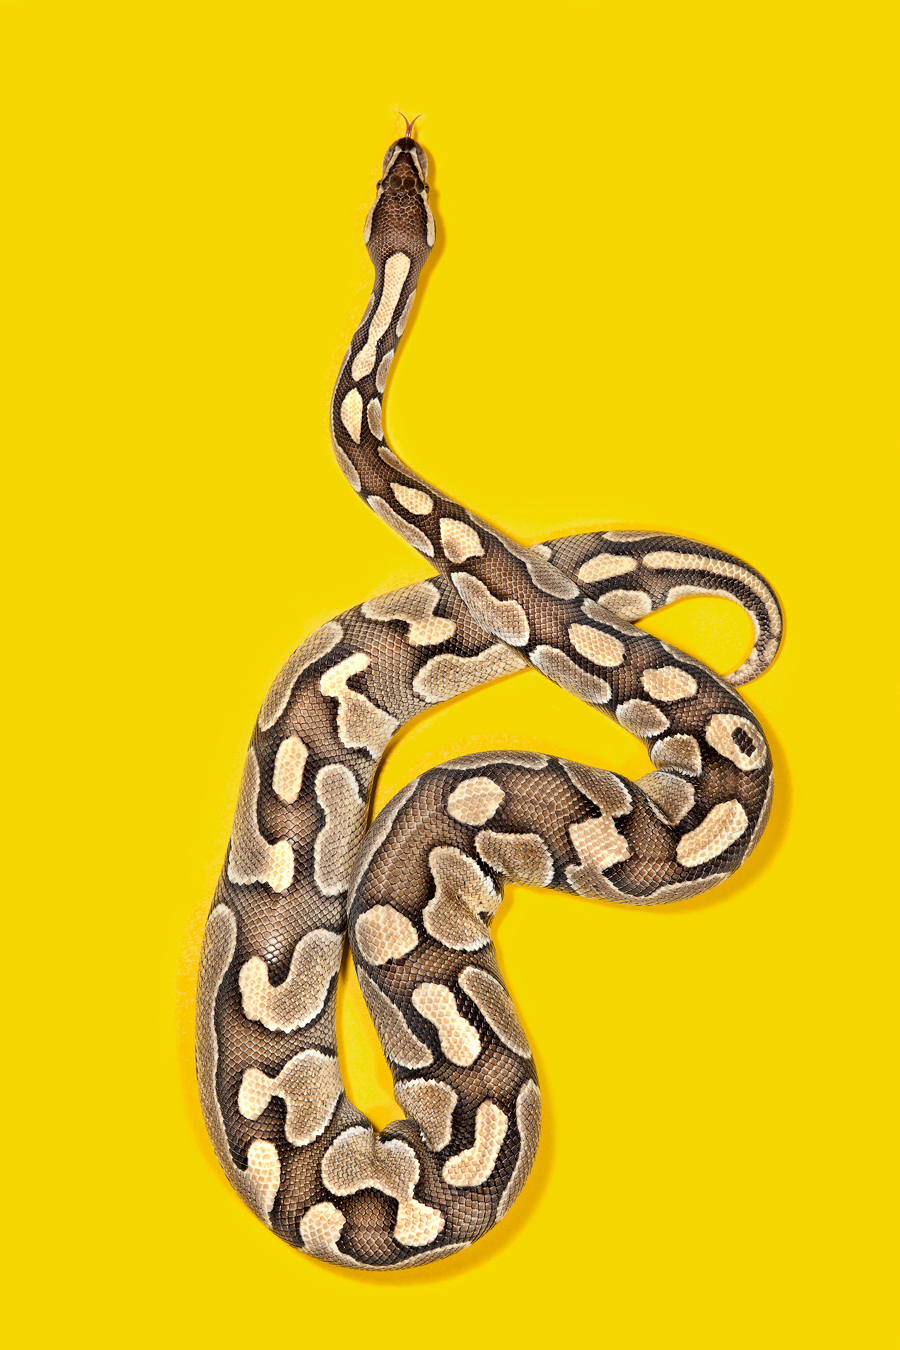 snakes Slitherstition Andrew McGibbon colour color superstition